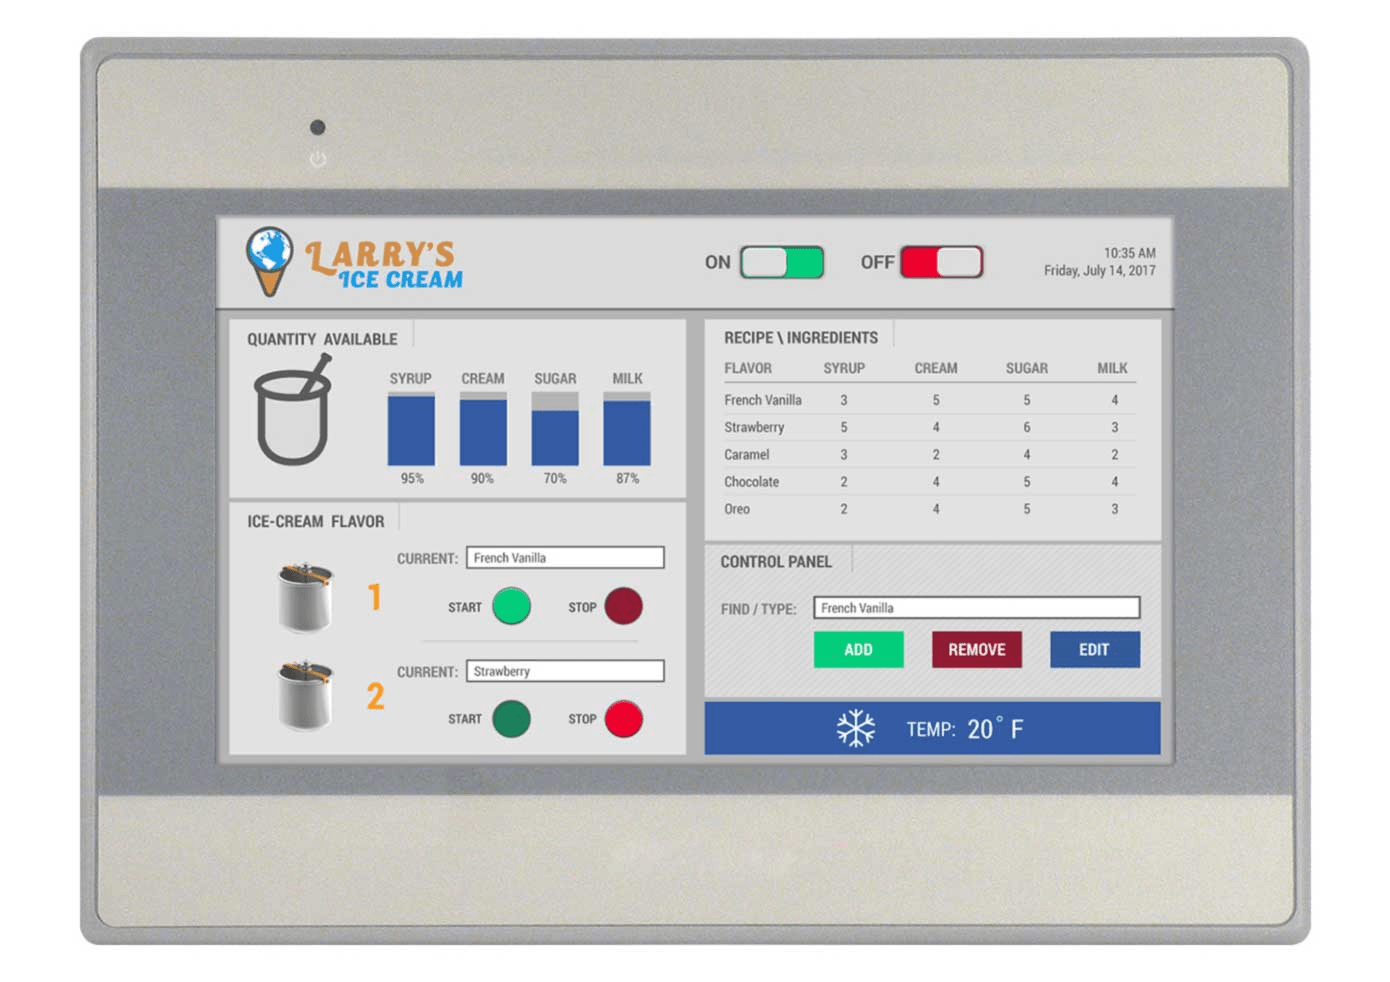 7 inch Advanced HMI with Touchscreen and Graphic User Interface